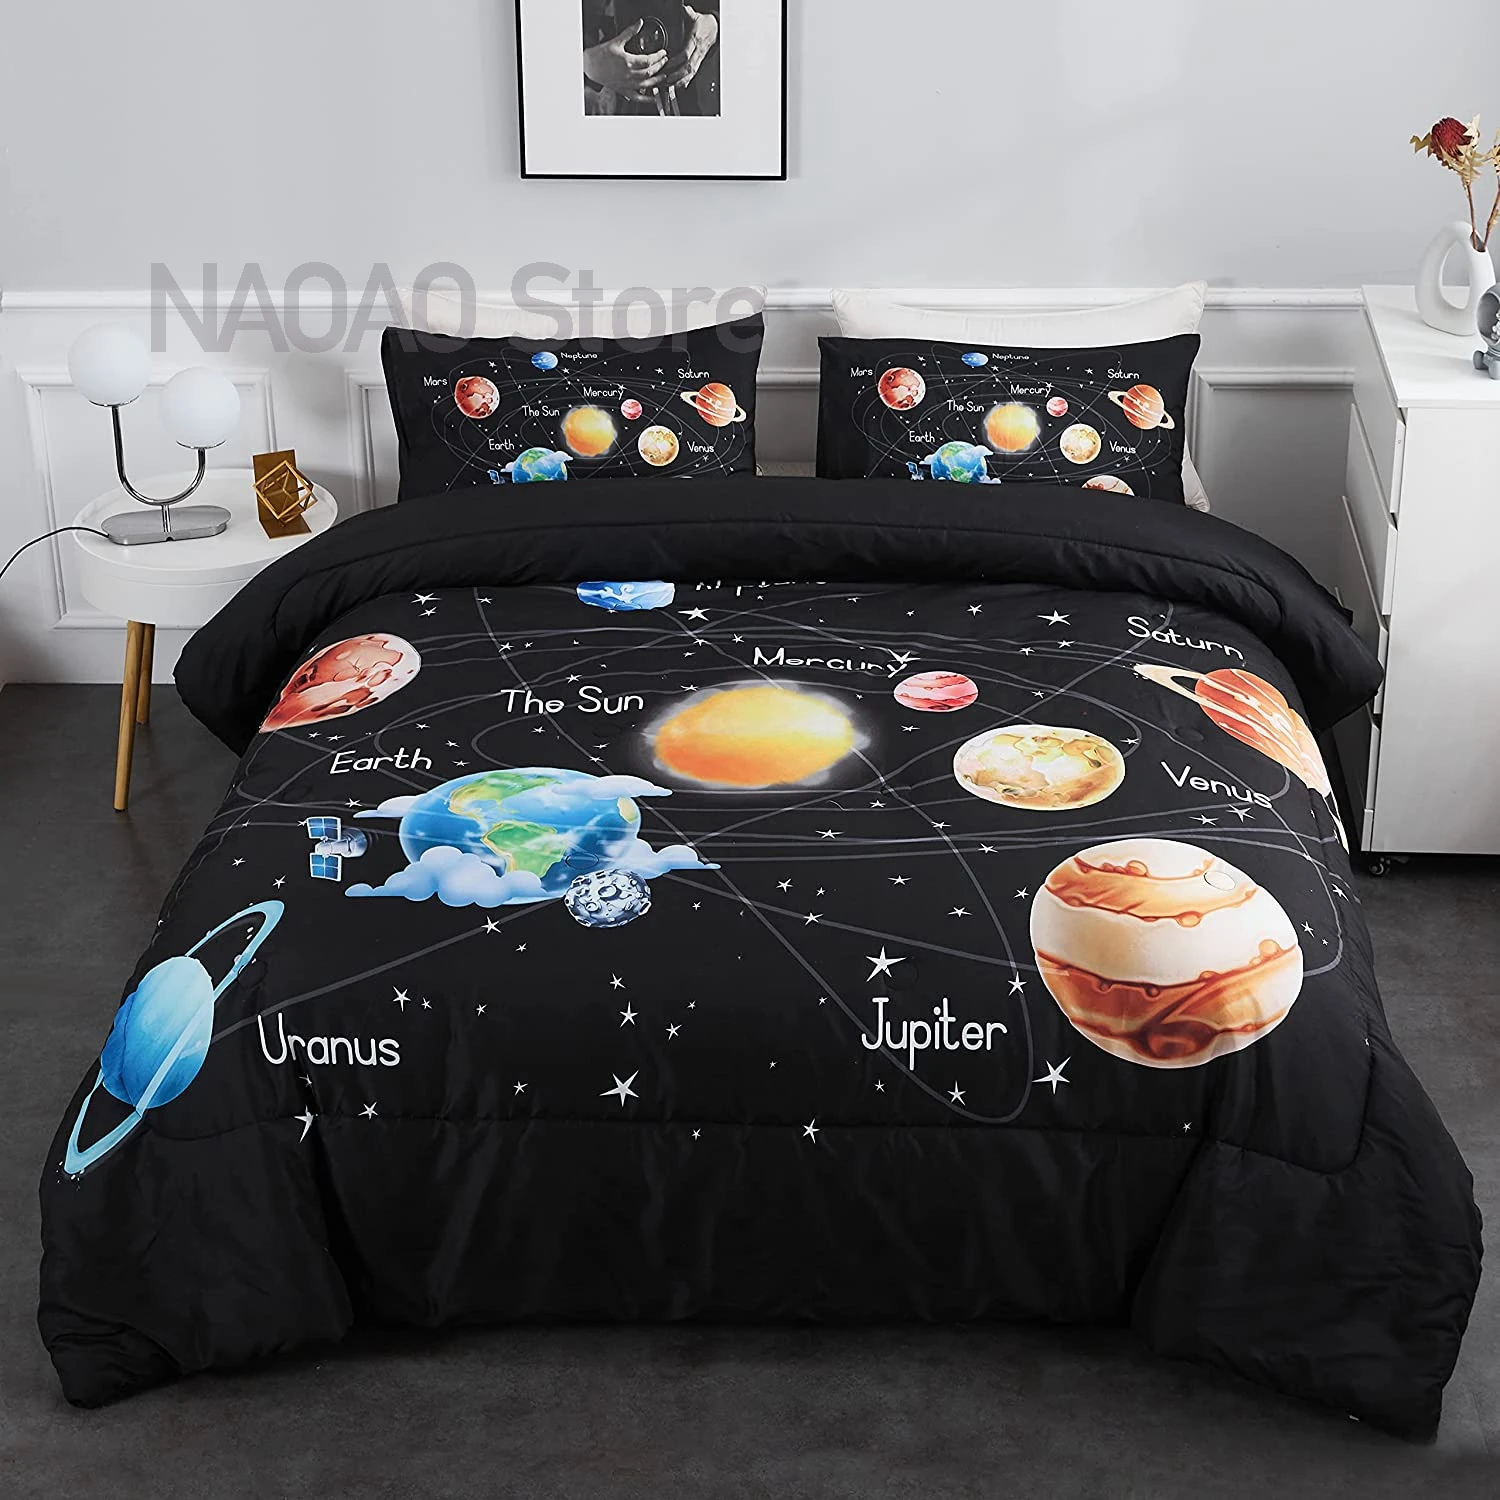 

Solar System Duvet Cover Outer Space Bedding Set Universe Planets Theme Comforter Set for Boys Kids With Pillowcases